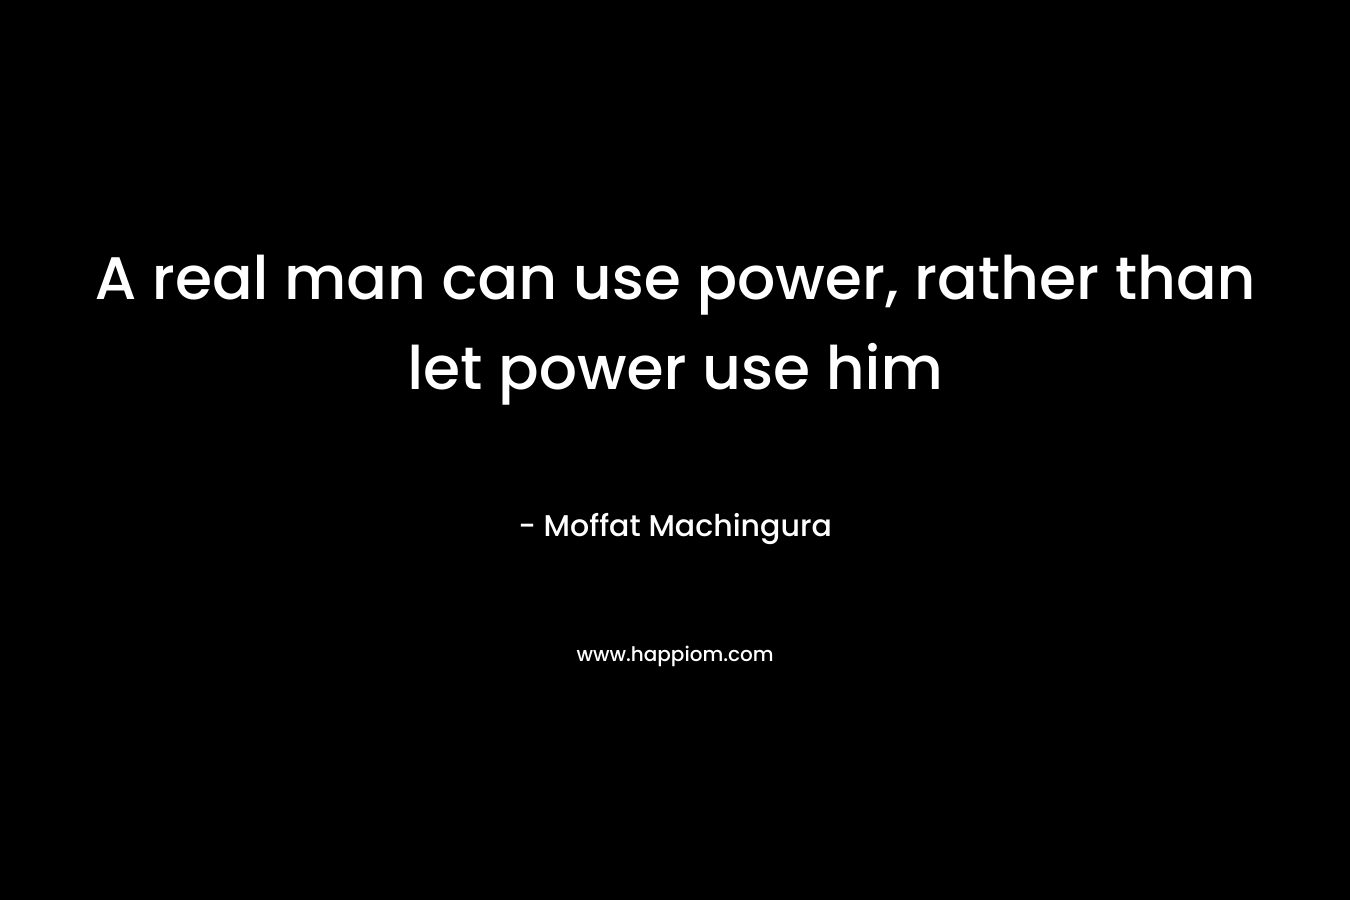 A real man can use power, rather than let power use him